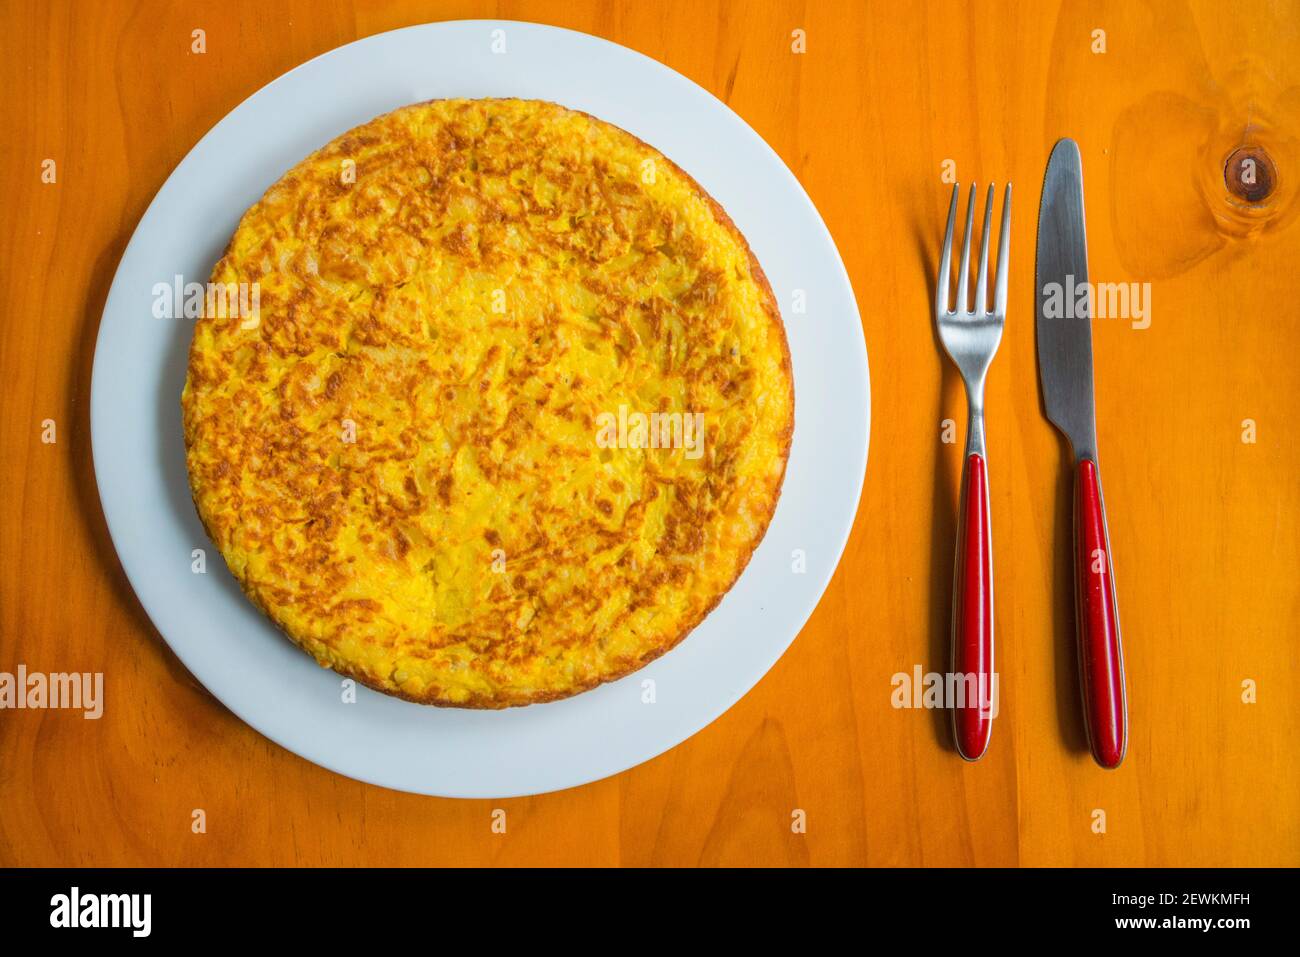 Spanish omelet. View from above. Stock Photo